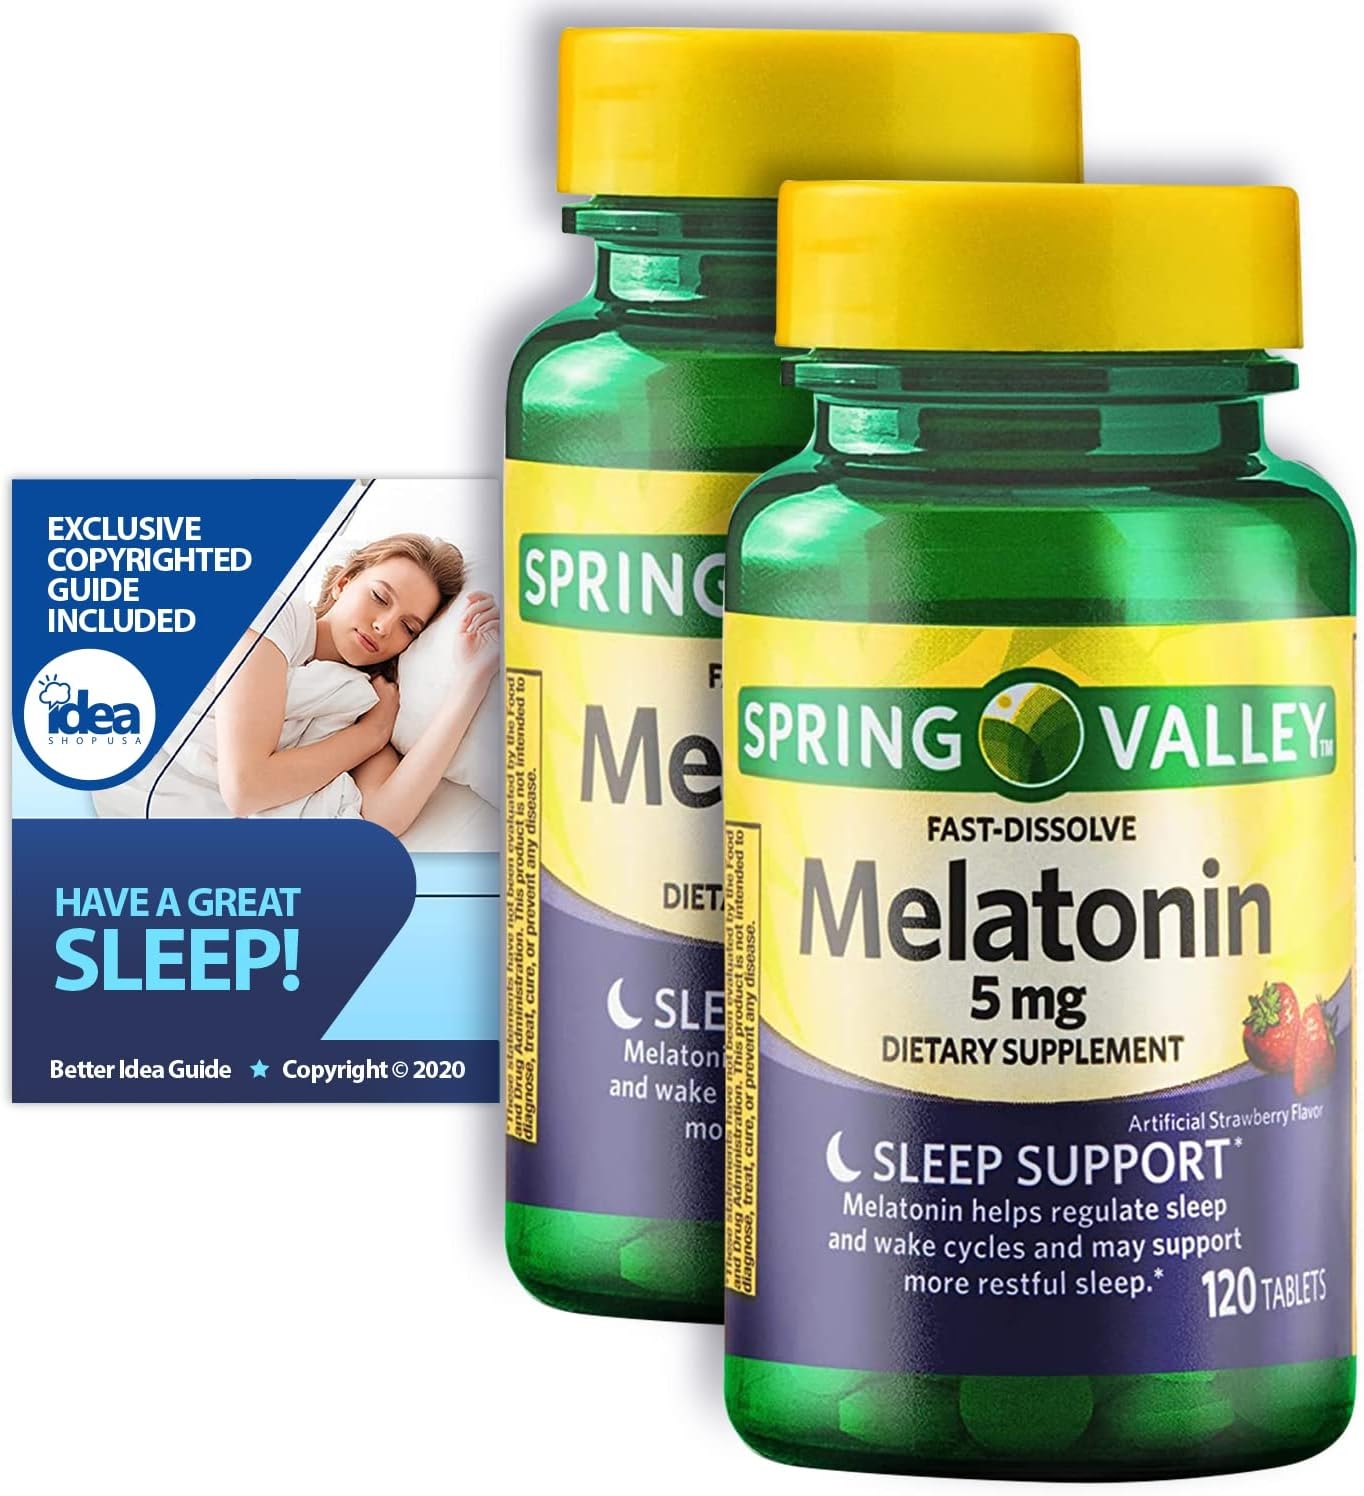 Melatonin Fast-Dissolve Tablets, 5mg by Spring Valley, 120 Ct (2 Pack) Bundle with Exclusive “Have a Great Sleep” – Better Idea